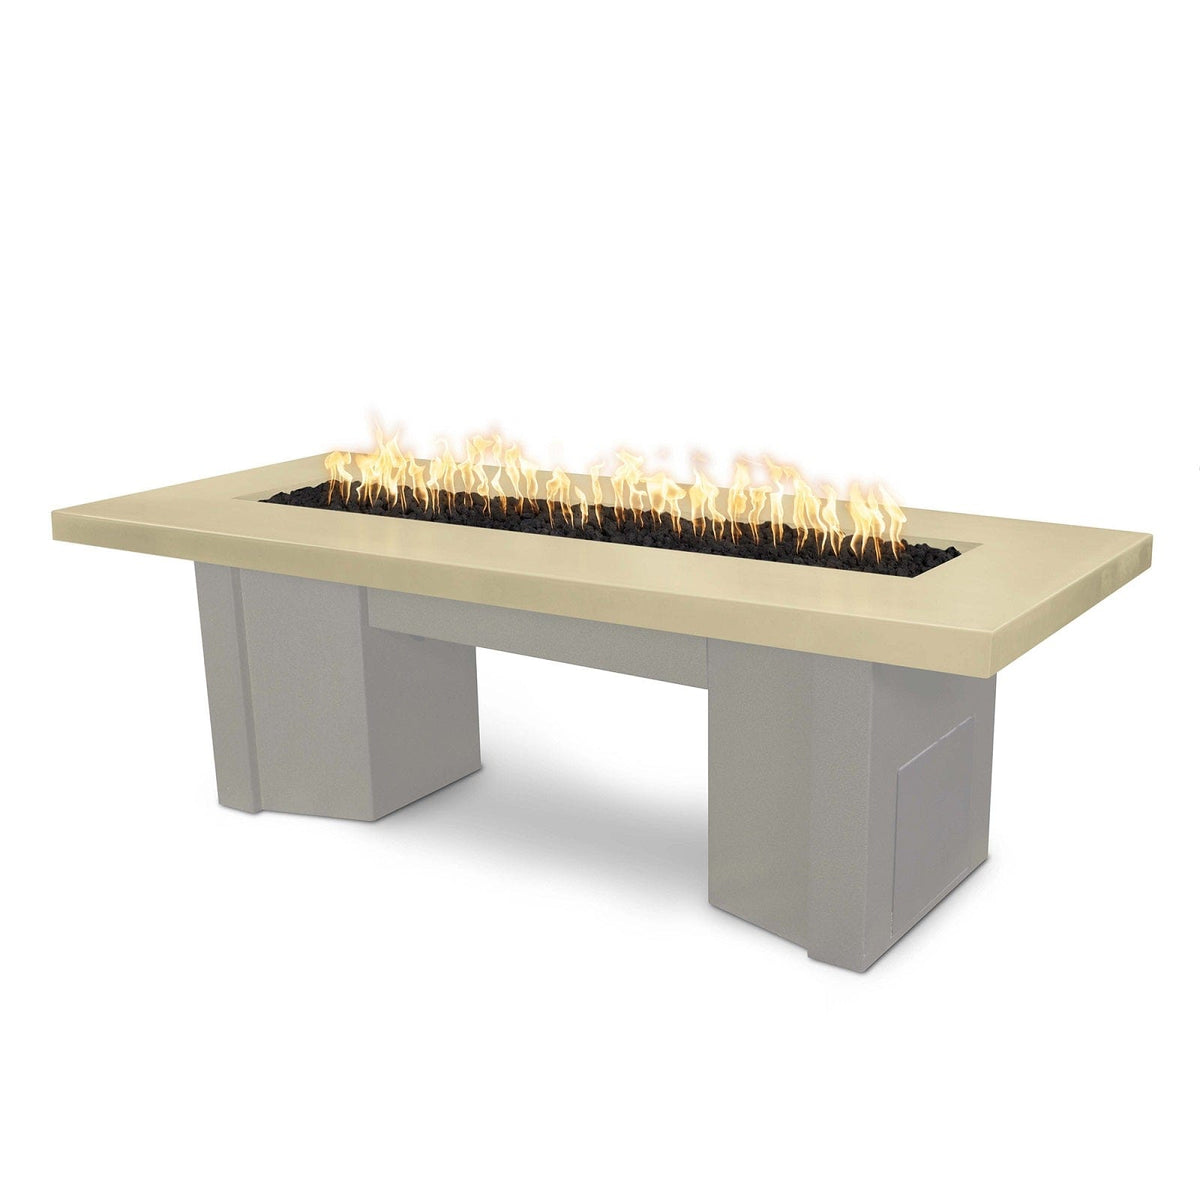 The Outdoor Plus Fire Features Vanilla (-VAN) / Pewter Powder Coated Steel (-PEW) The Outdoor Plus 60&quot; Alameda Fire Table Smooth Concrete in Liquid Propane - Flame Sense System with Push Button Spark Igniter / OPT-ALMGFRC60FSEN-LP